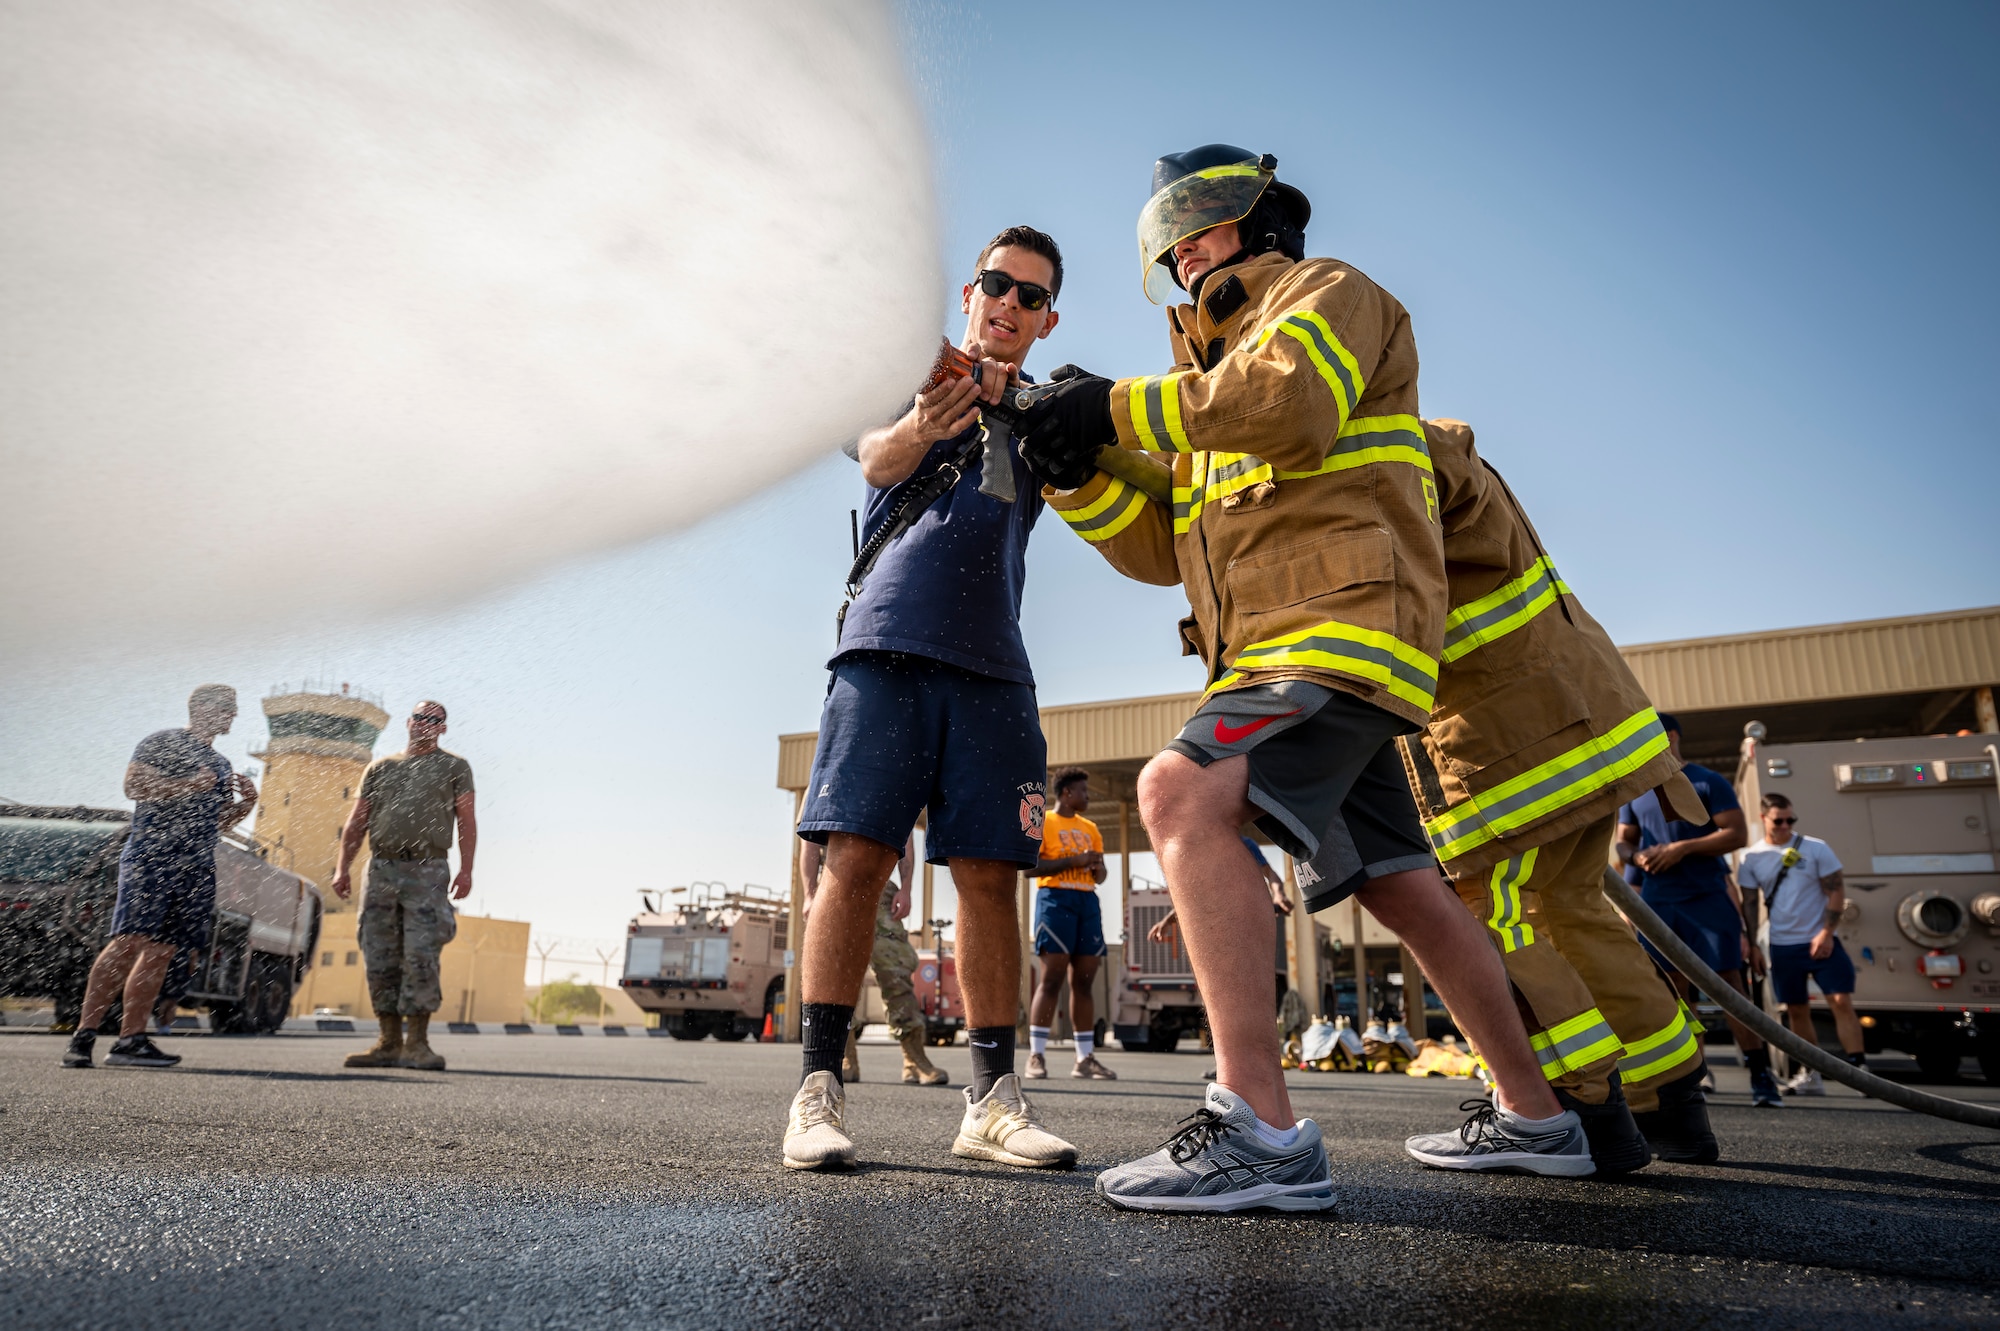 U.S. Air Force Airman 1st Class Kelvis Yera-Alonso, left, 379th Expeditionary Civil Engineer Squadron firefighter, instructs Staff Sgt. Joshua Yewcic, right, 379th ECES force protection, how to handle a firehose at Al Udeid Air Base, Qatar, Nov. 27, 2021.